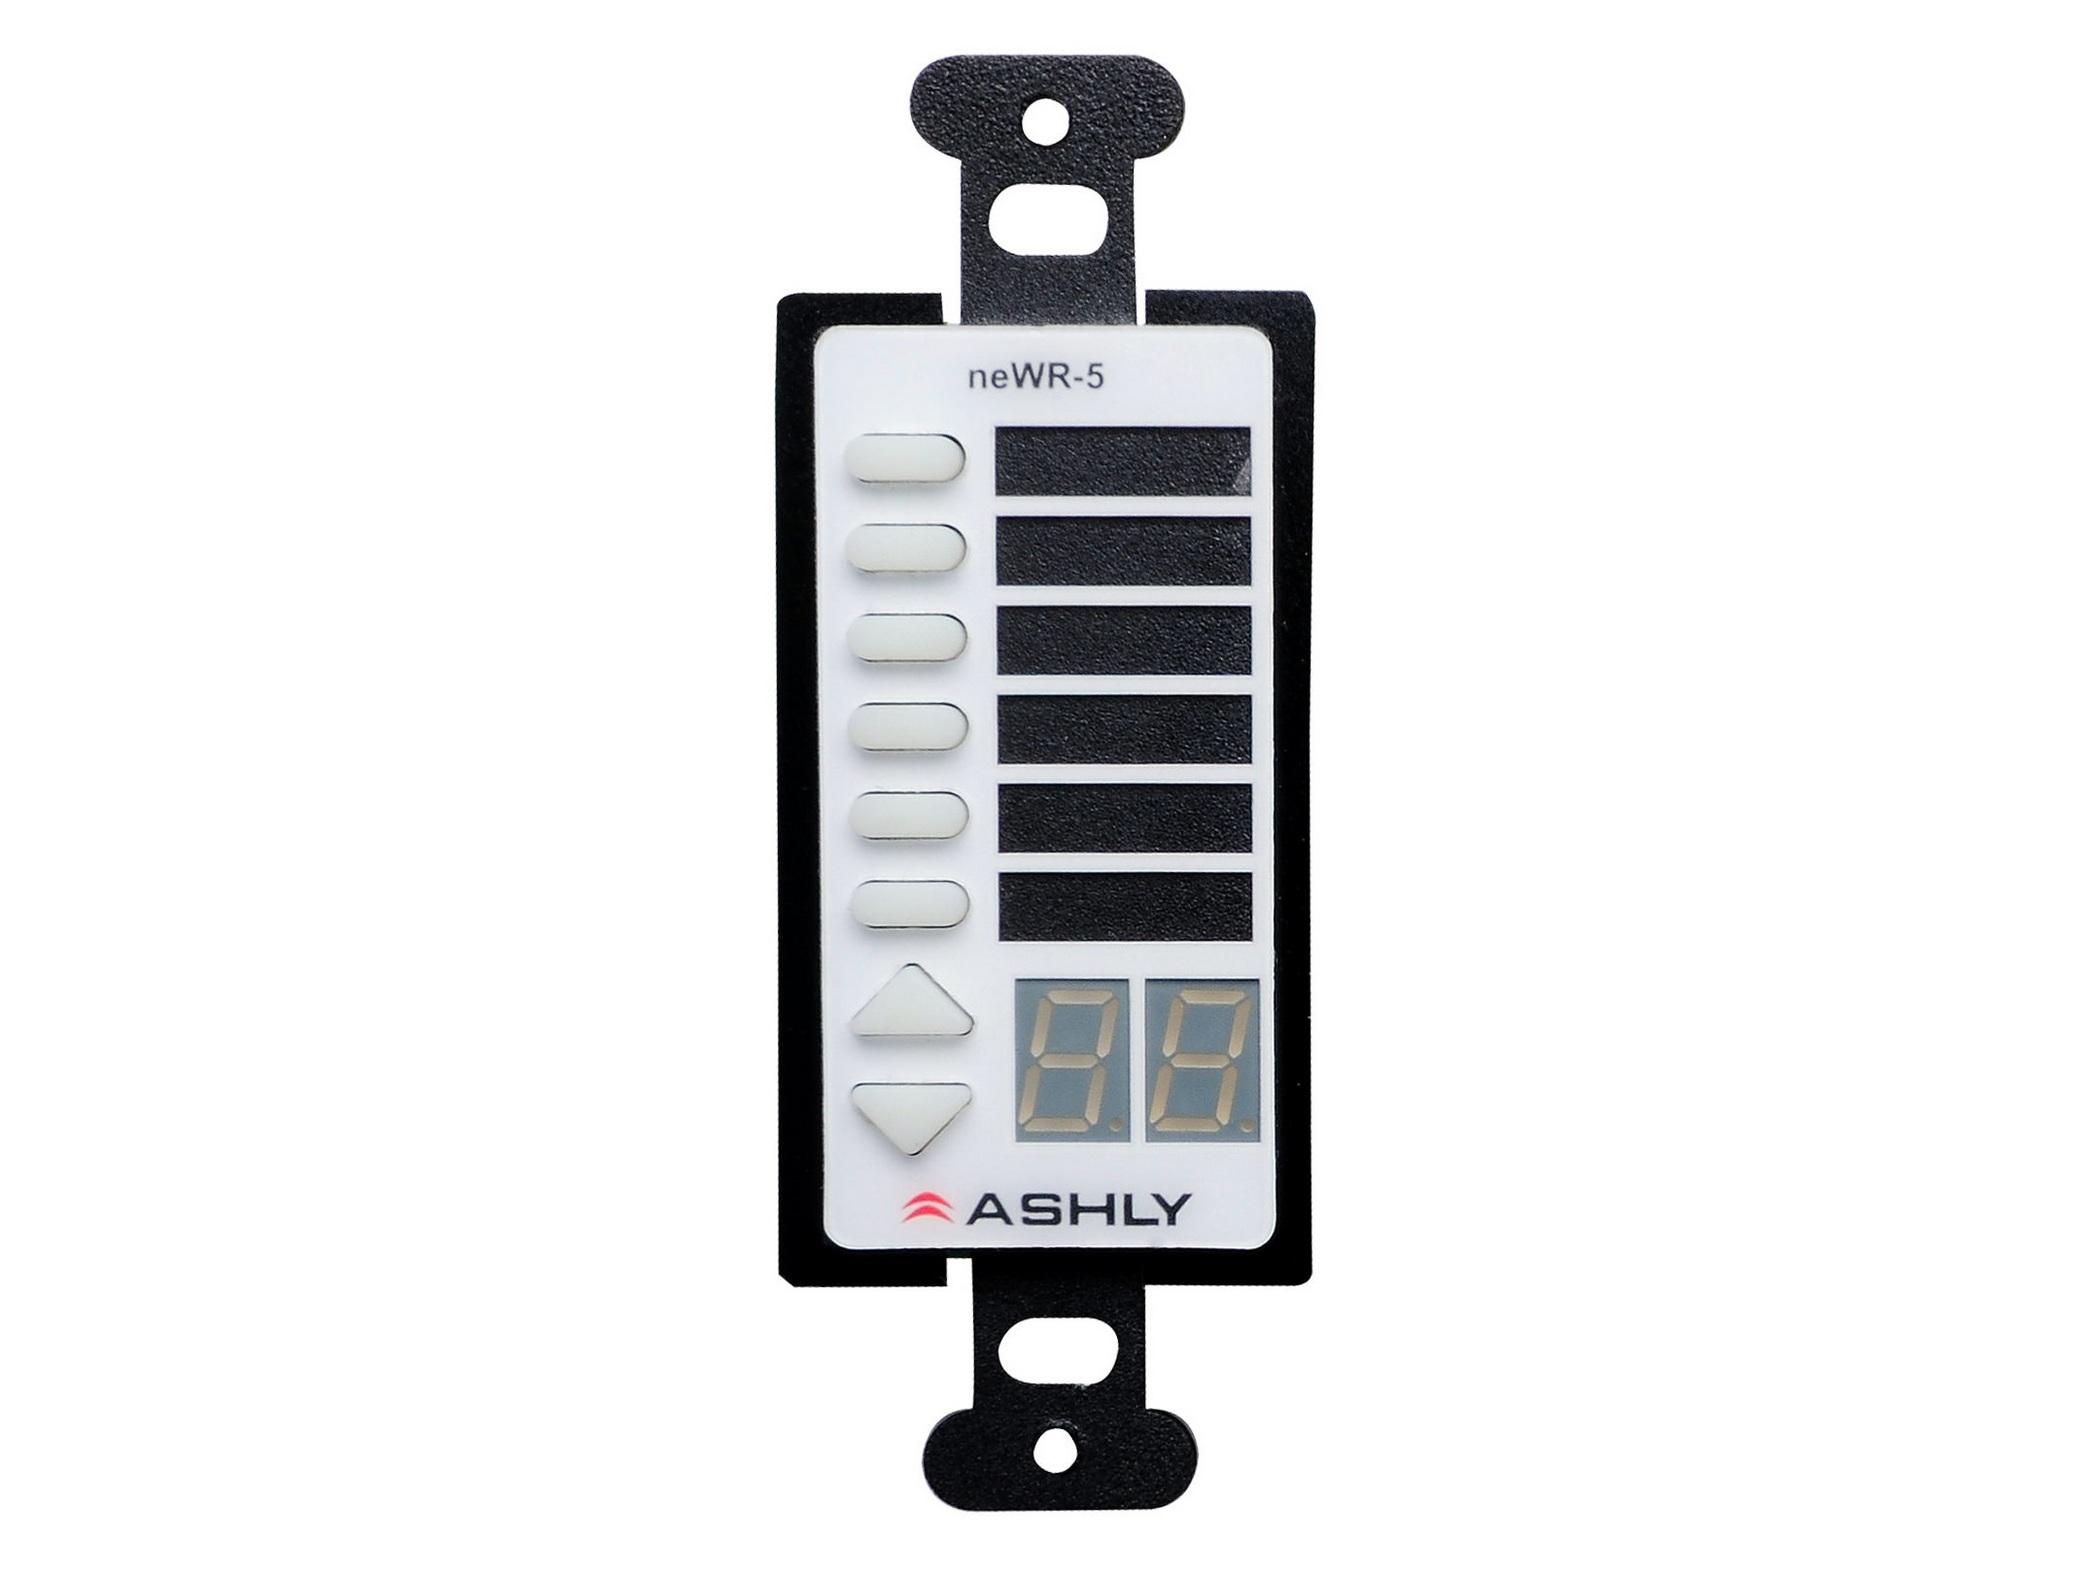 Ashly neWR-5 Wall Remote/Network Programmable Multi-Function